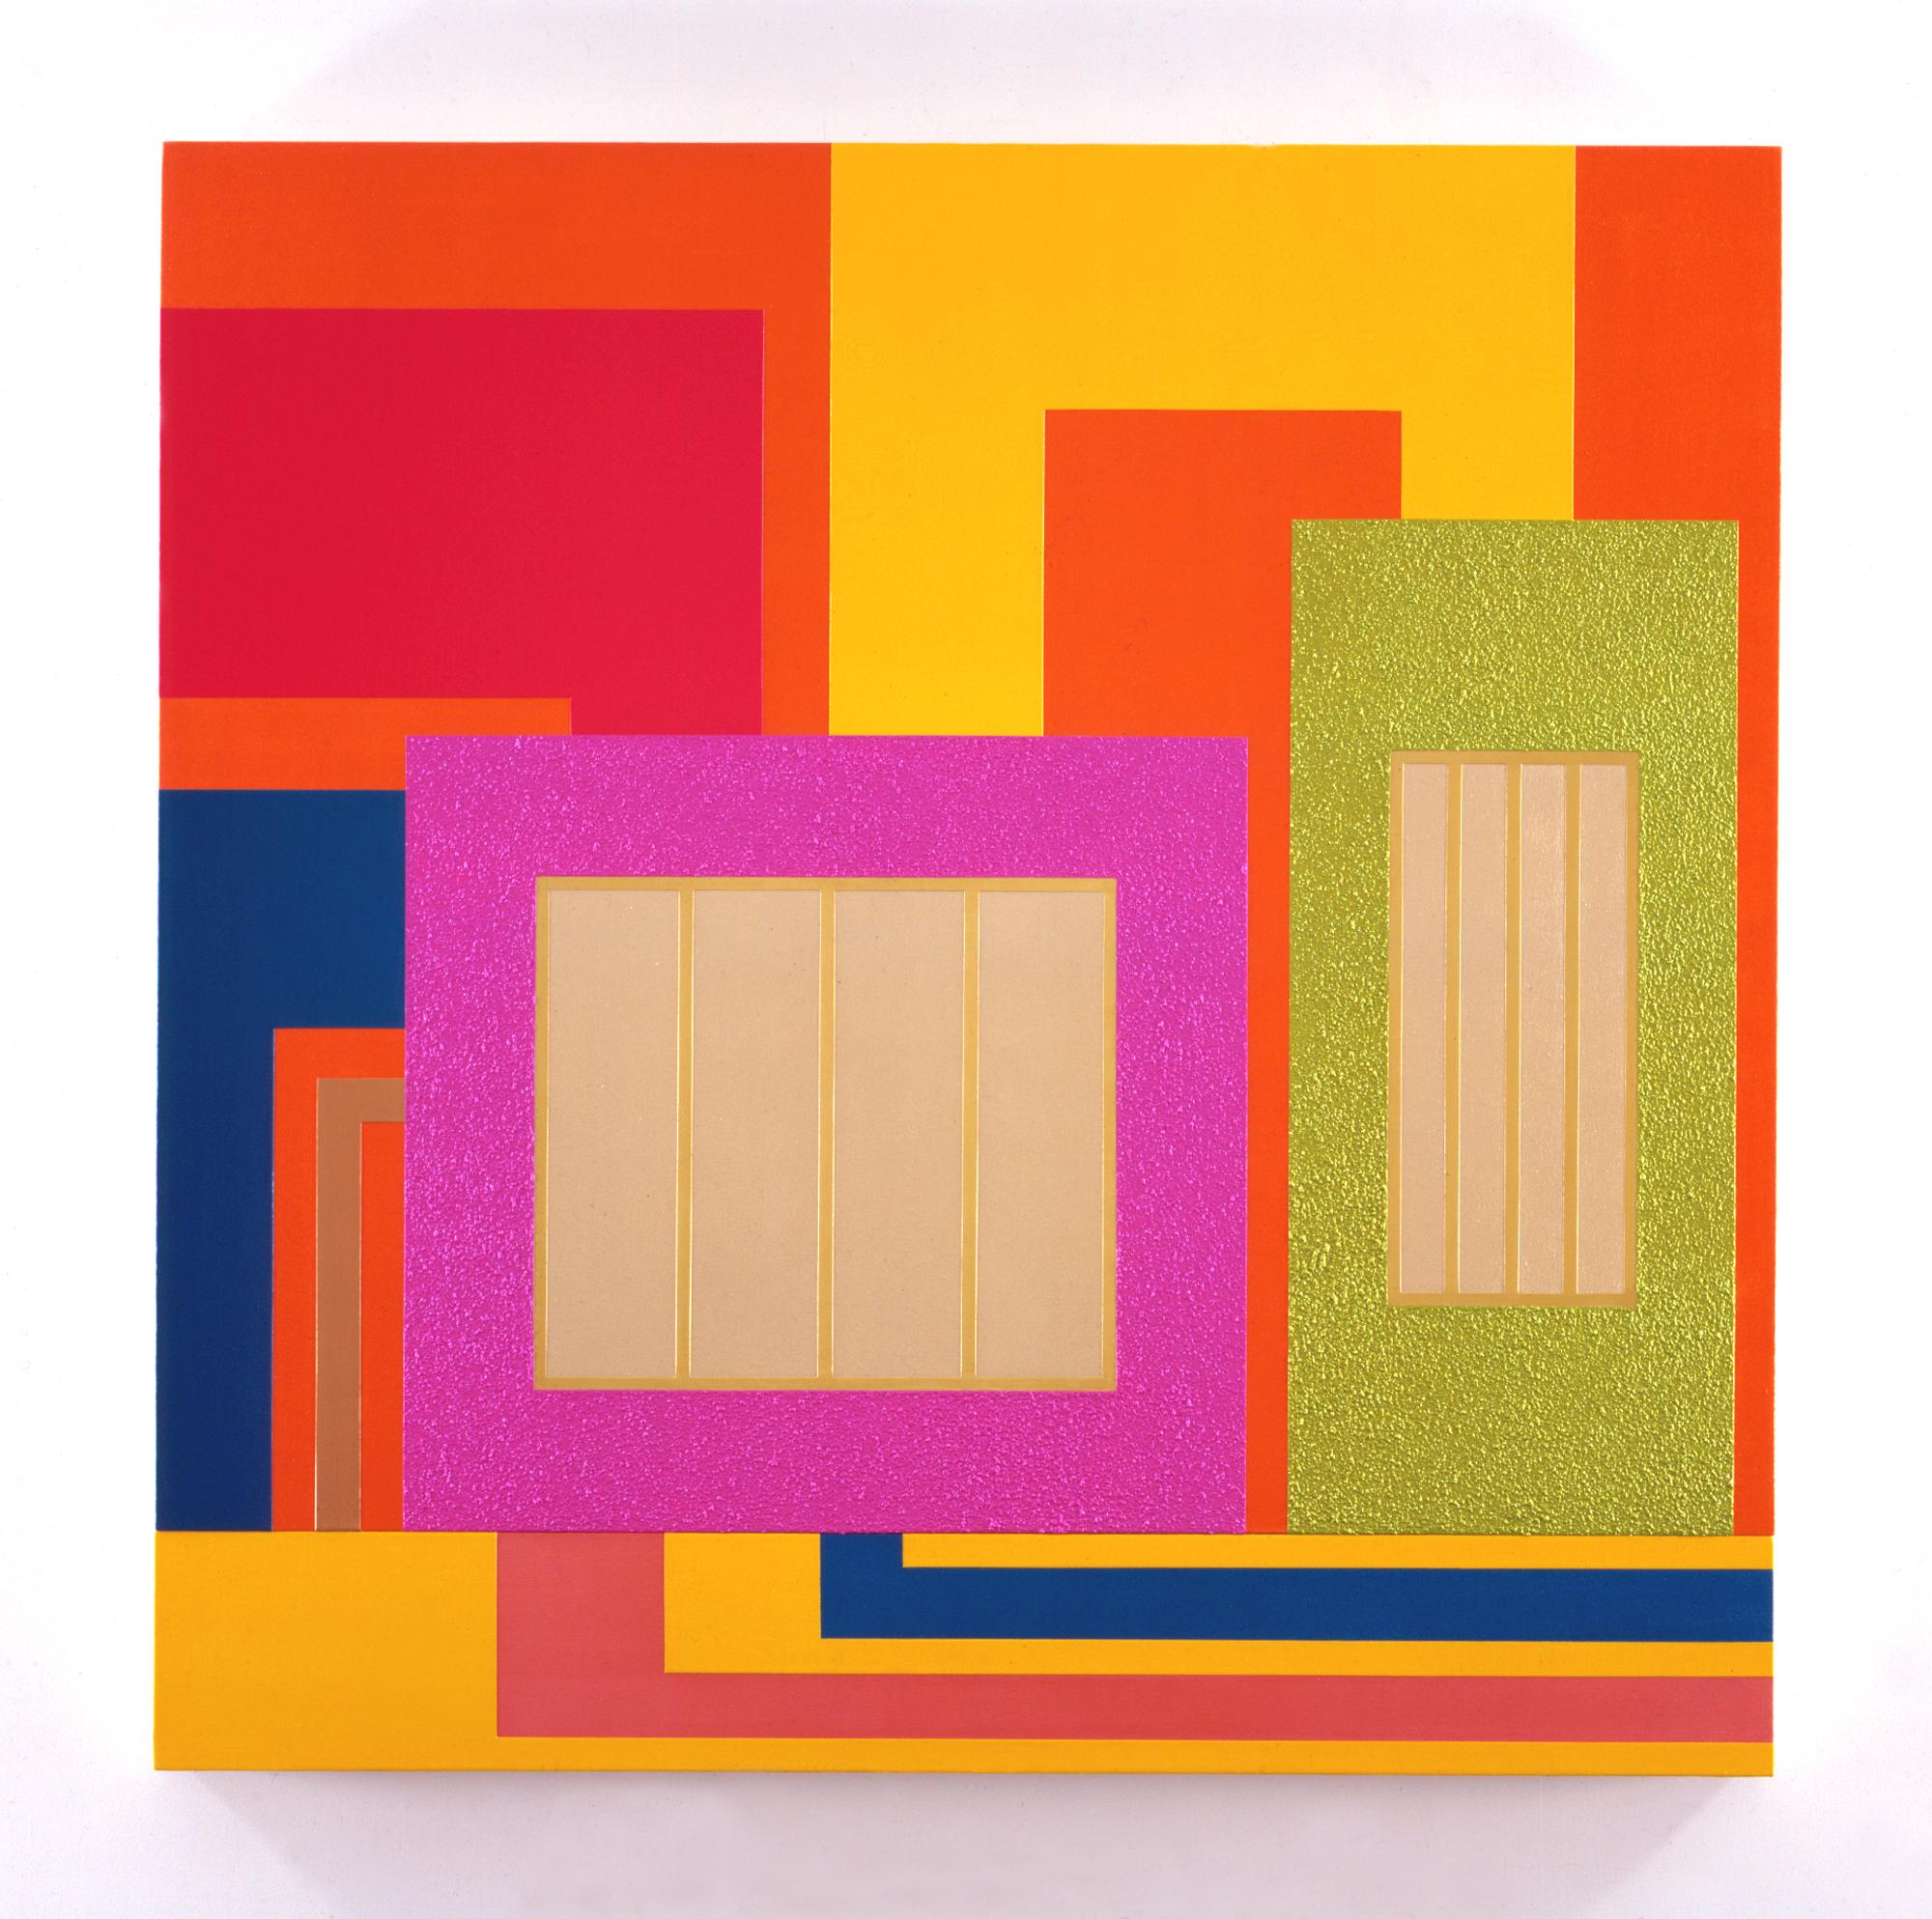 PETER HALLEY
Popism, 1998
Acrylic, fluorescent acrylic, metallic acrylic and Roll-a-Tex on canvas
75 x 74 inches
SGI3171